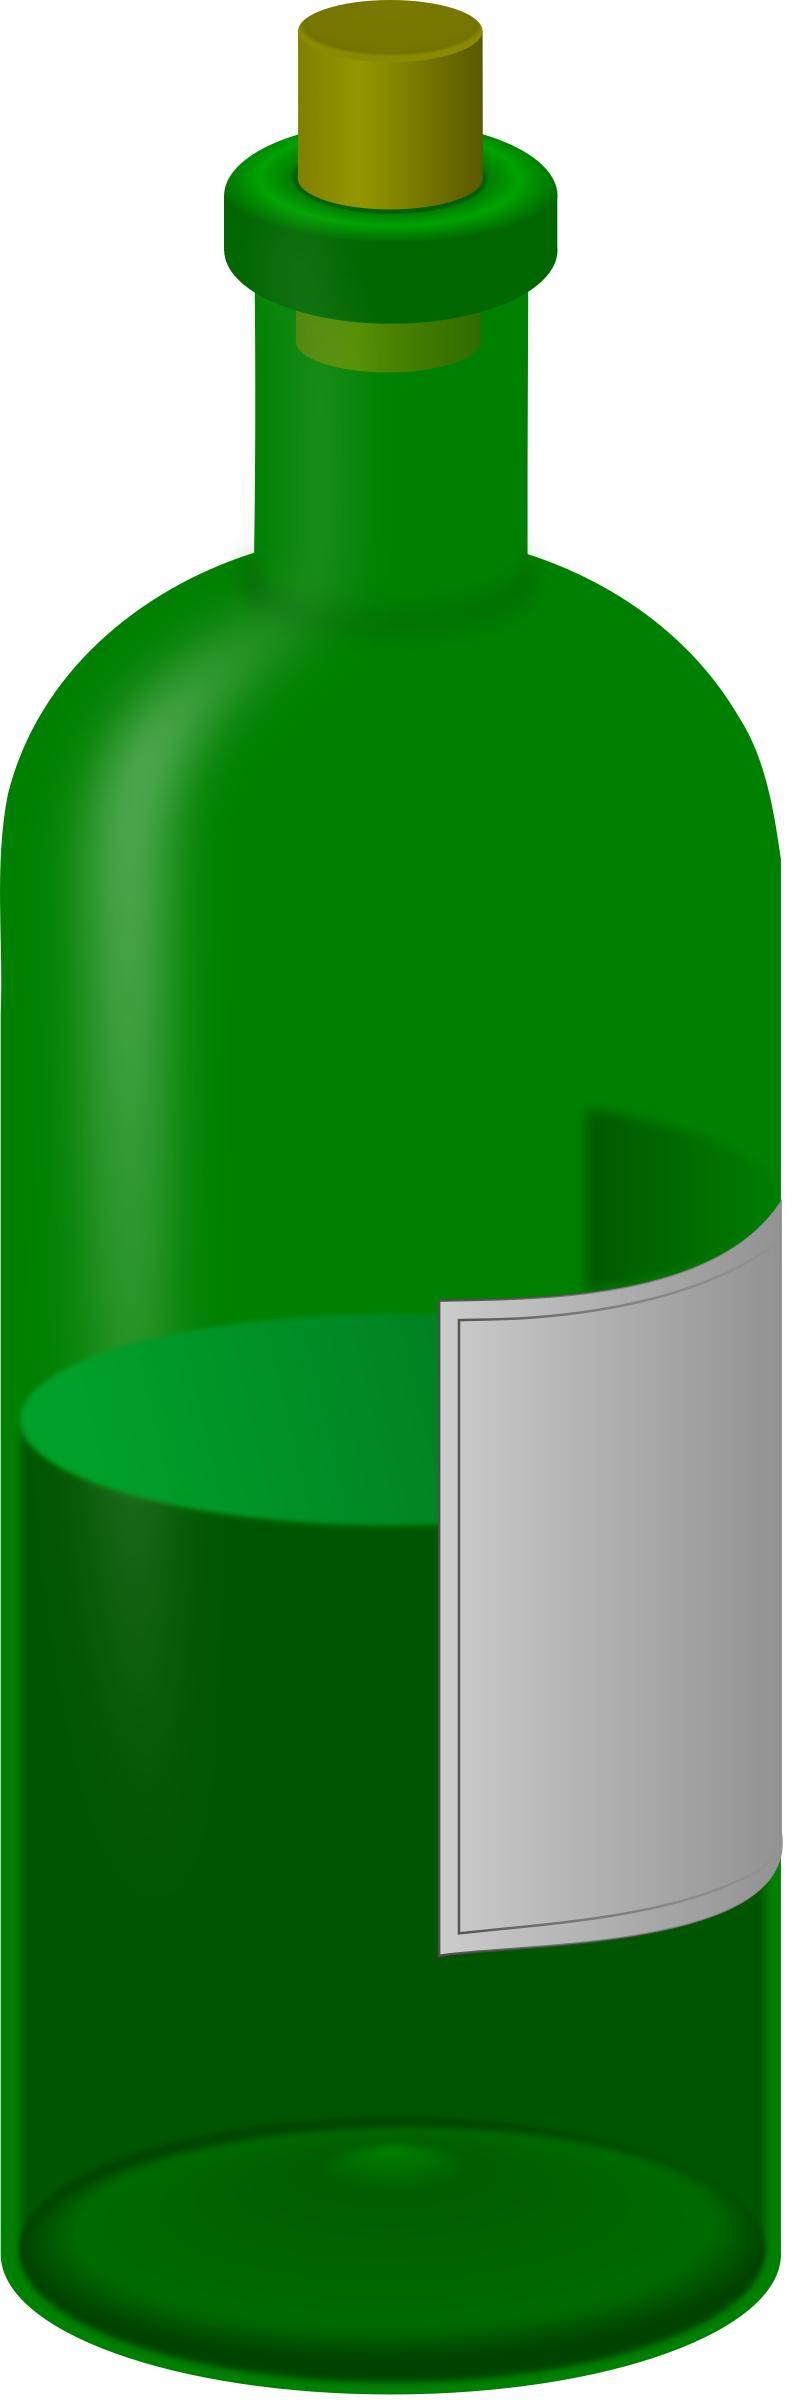 wine bottle with label png transparent